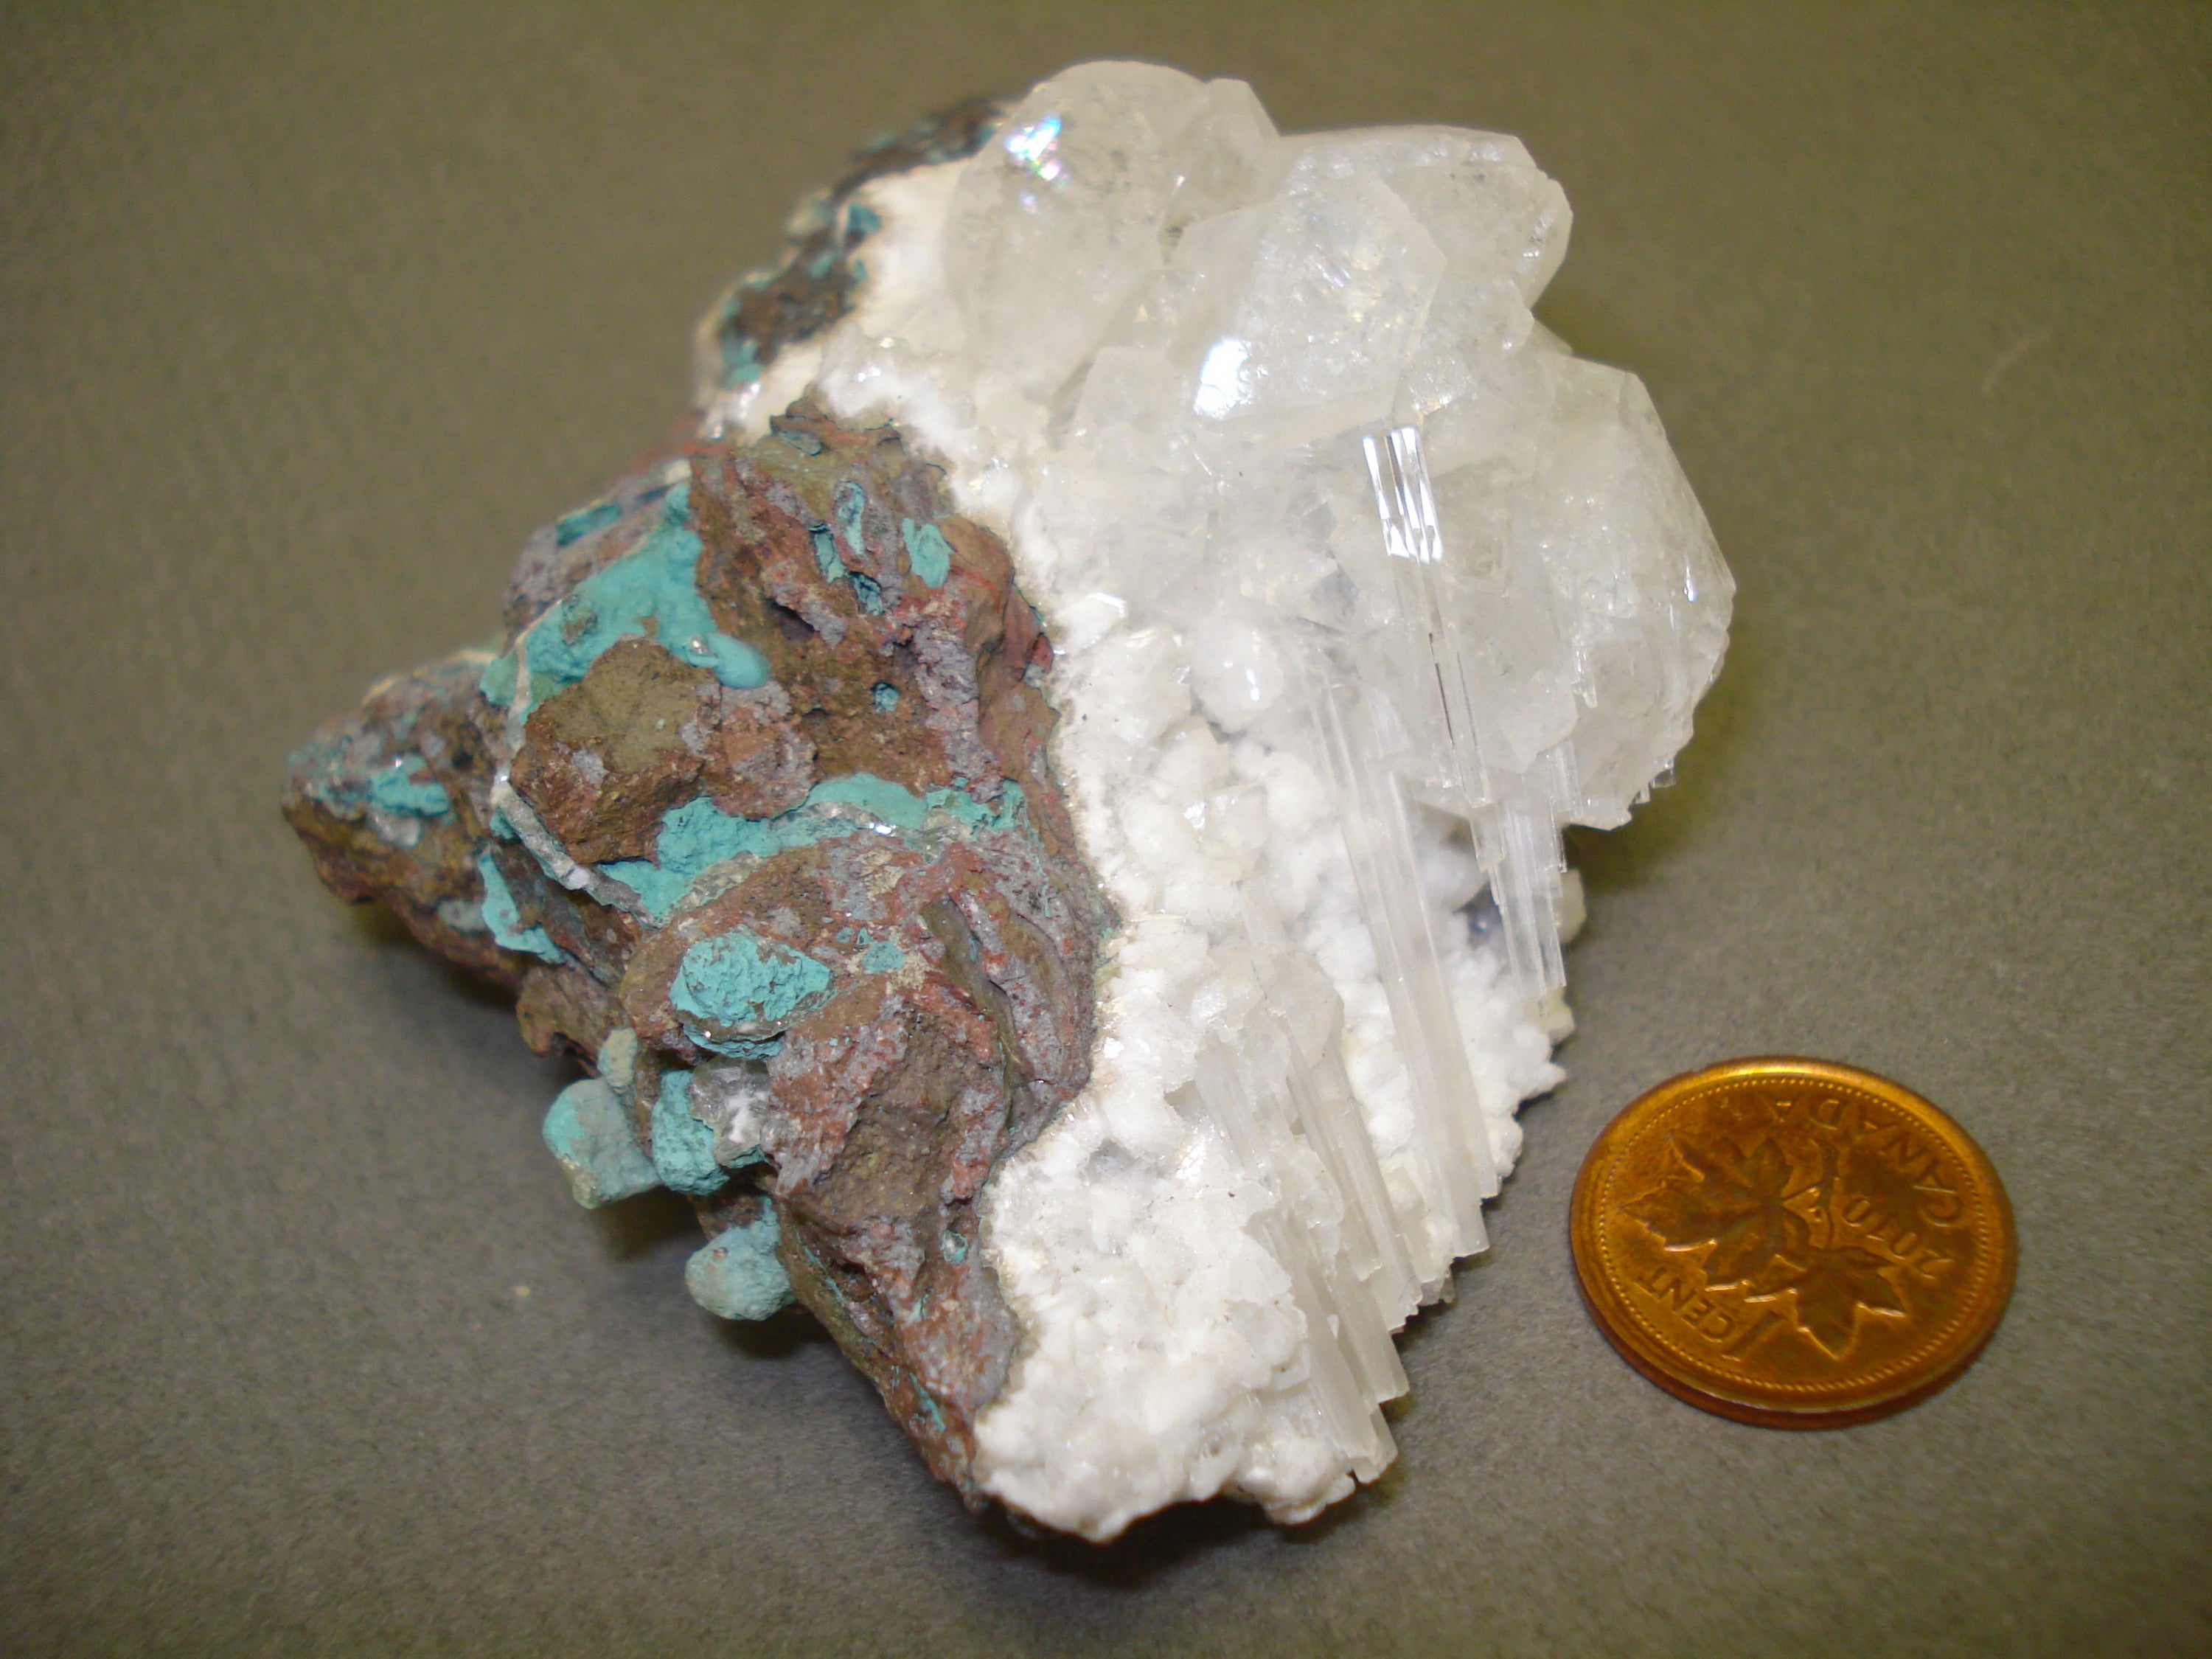 Apophyllite and Mesolite next to a penny for size comparison